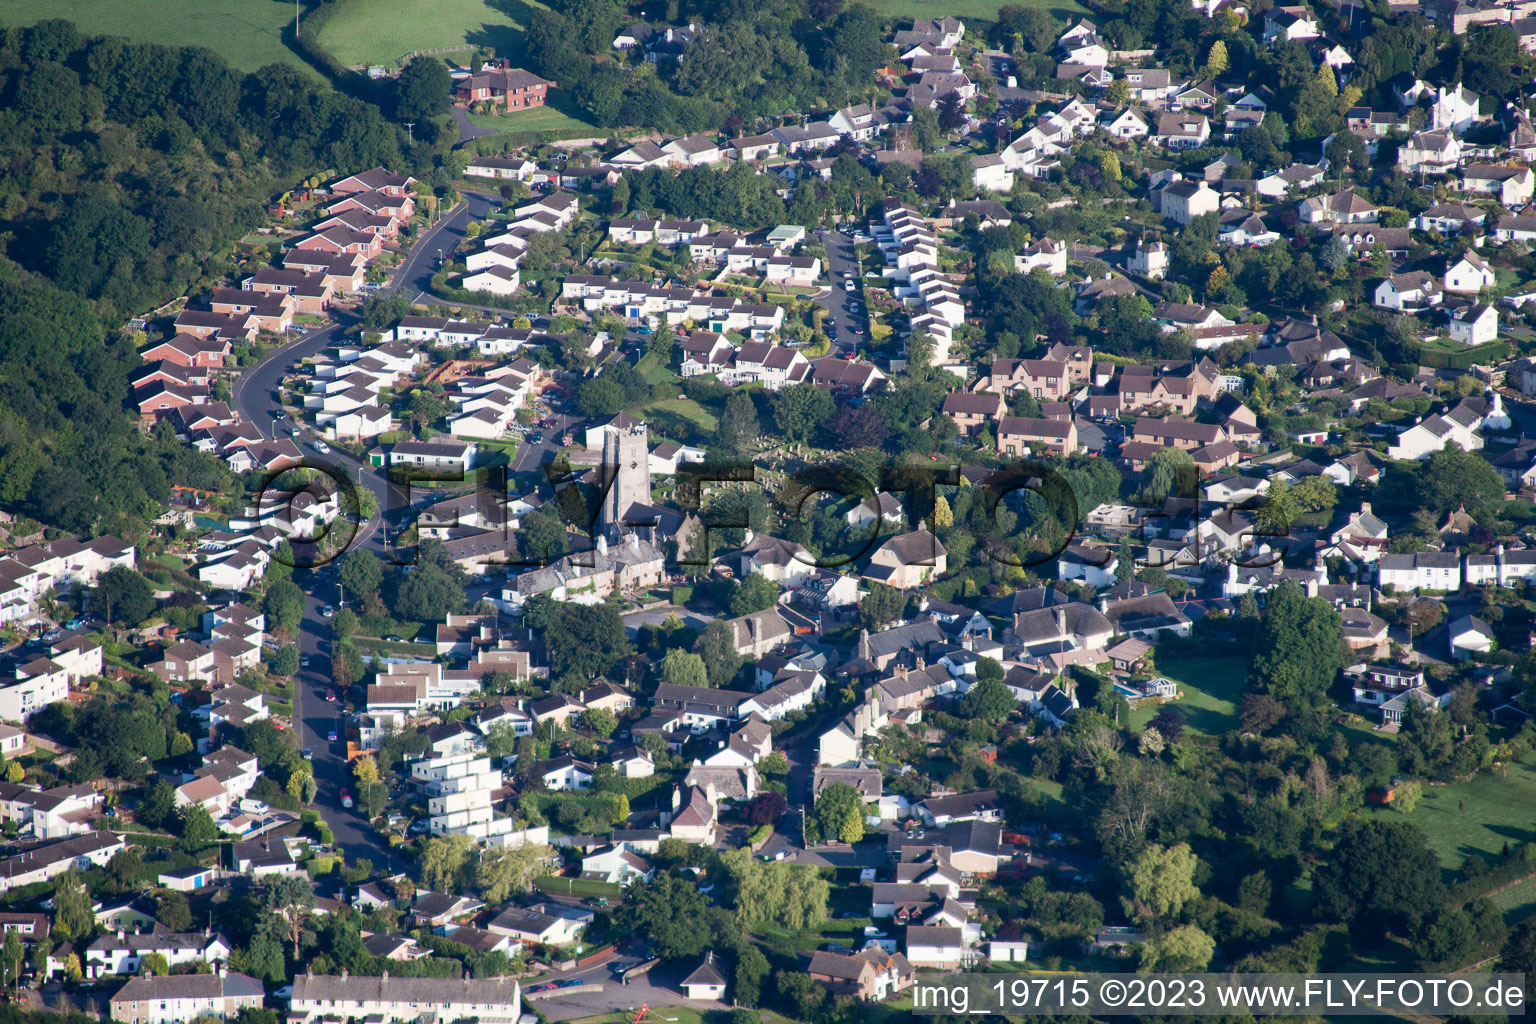 Kingskerswell in the state England, Great Britain seen from above